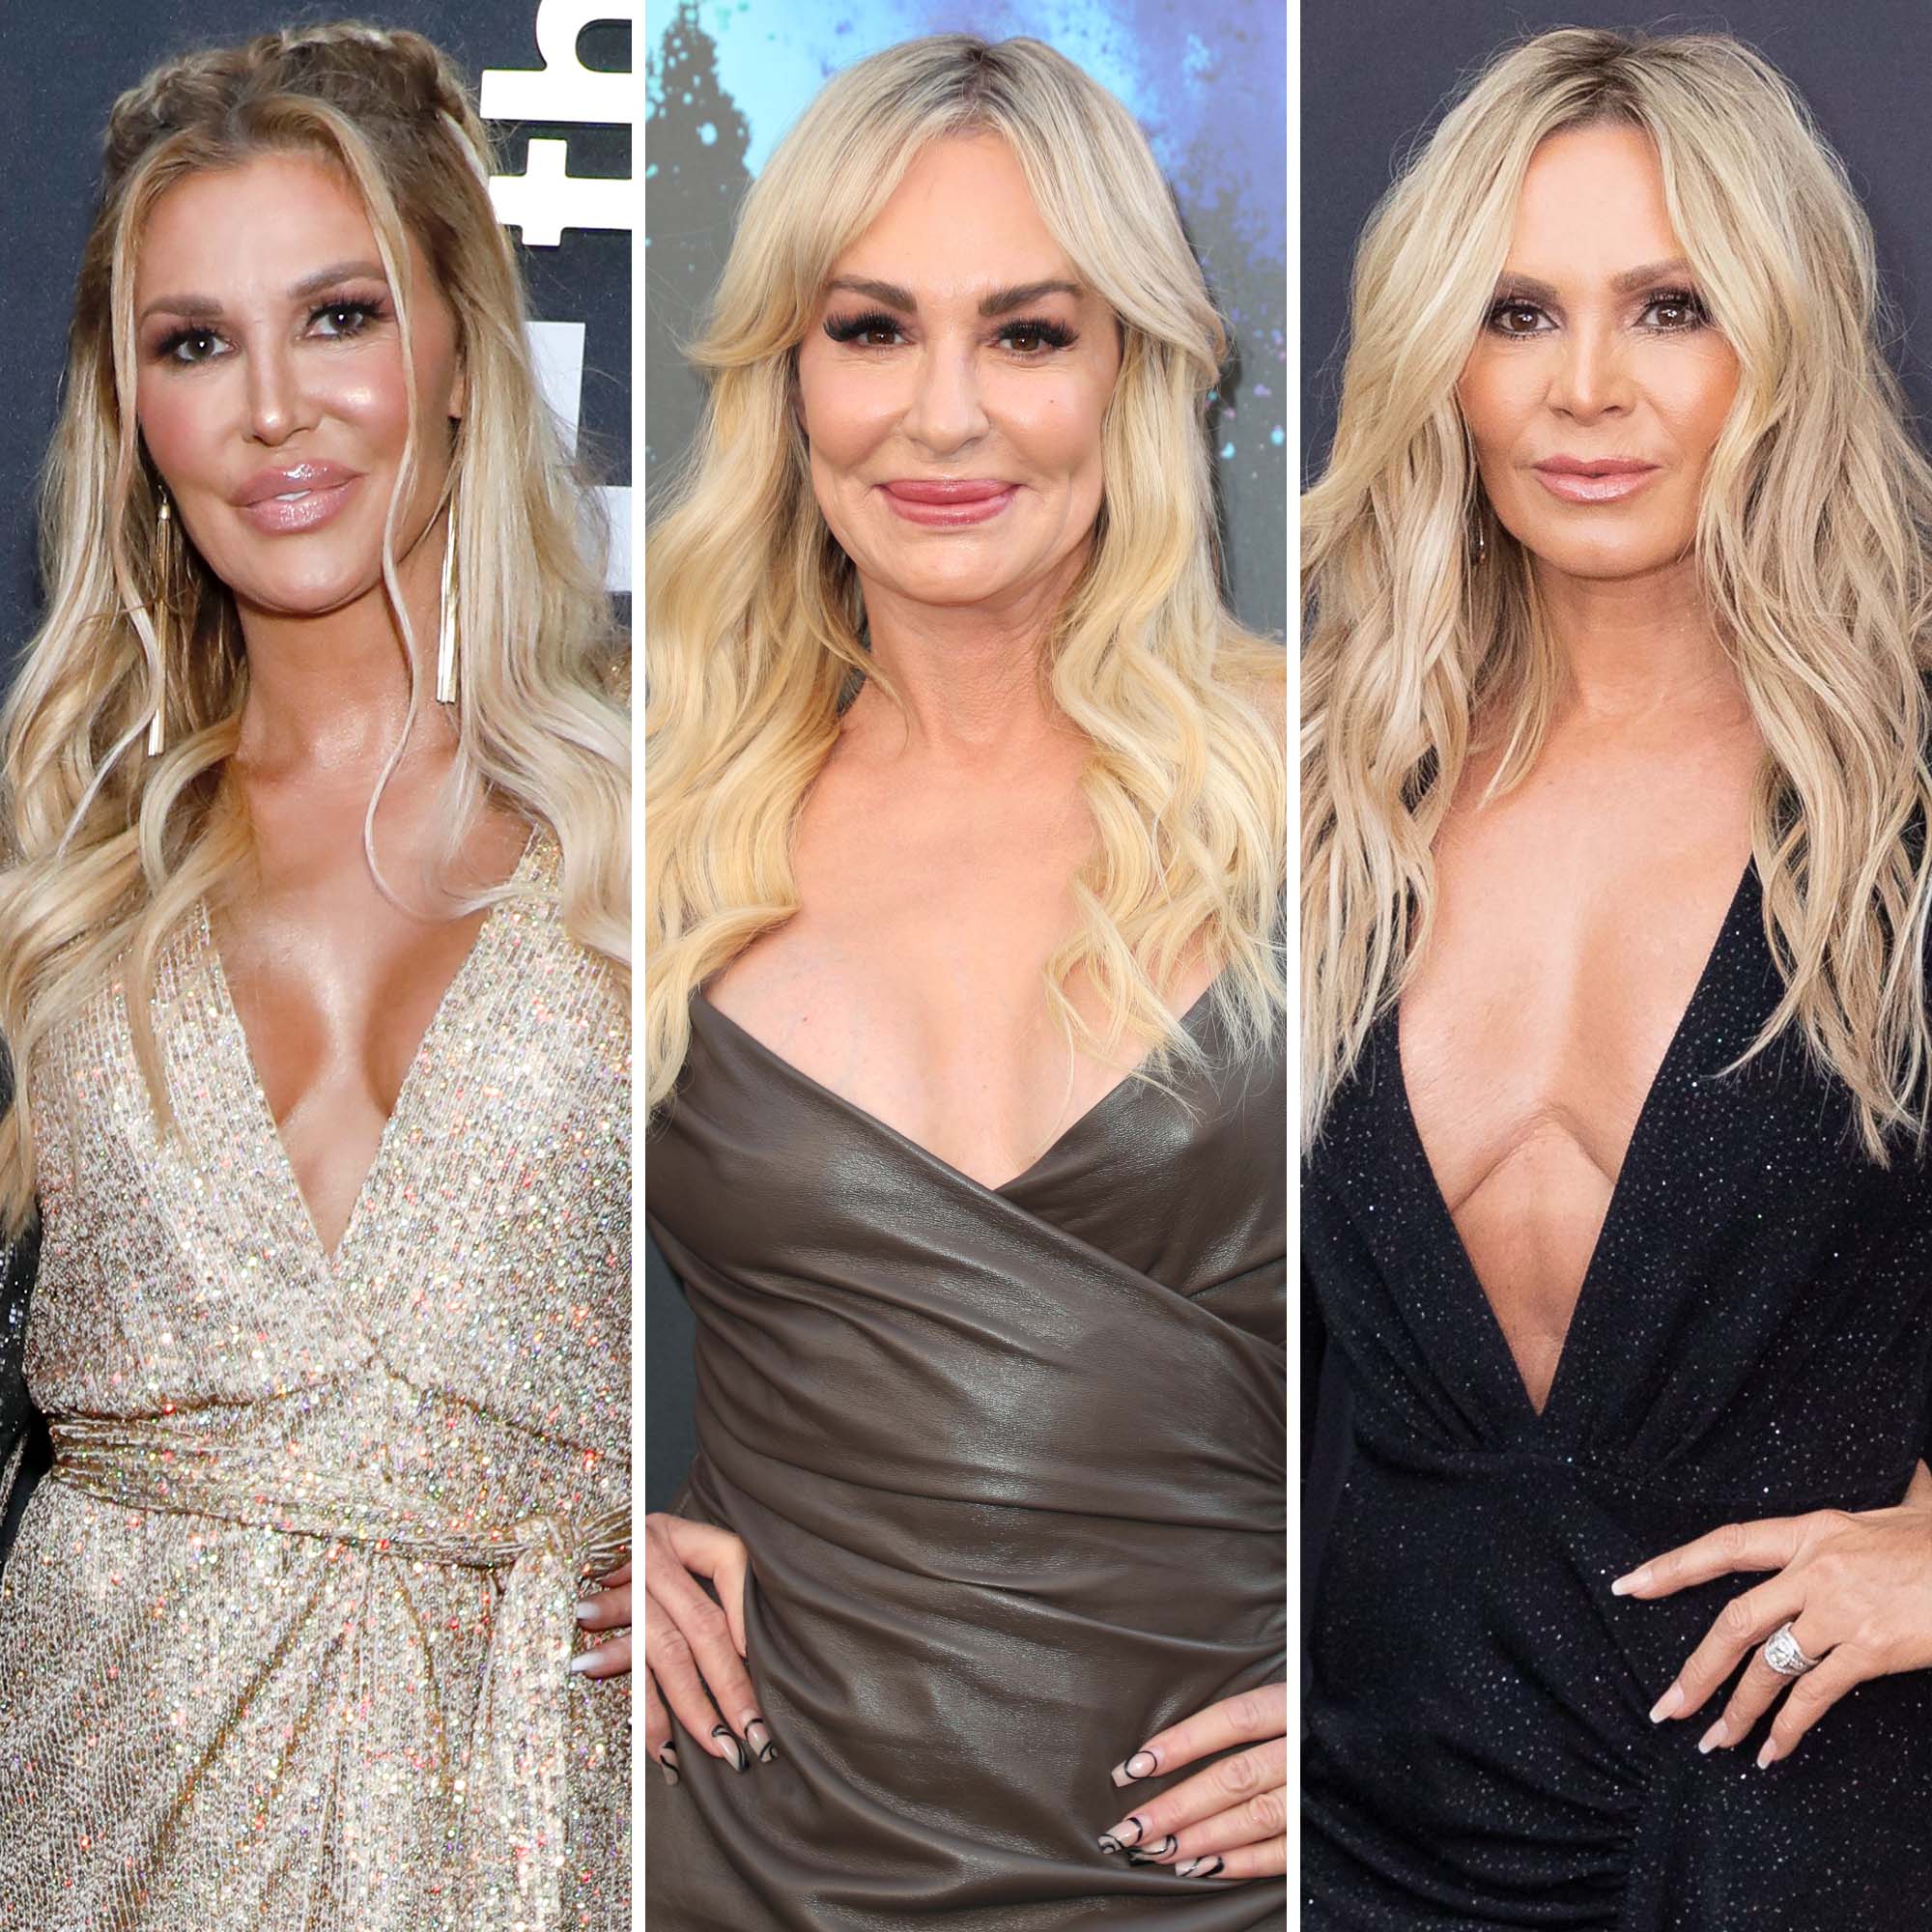 Brandi Glanvilles Feuds With Taylor Armstrong, Tamra Judge Explained image photo